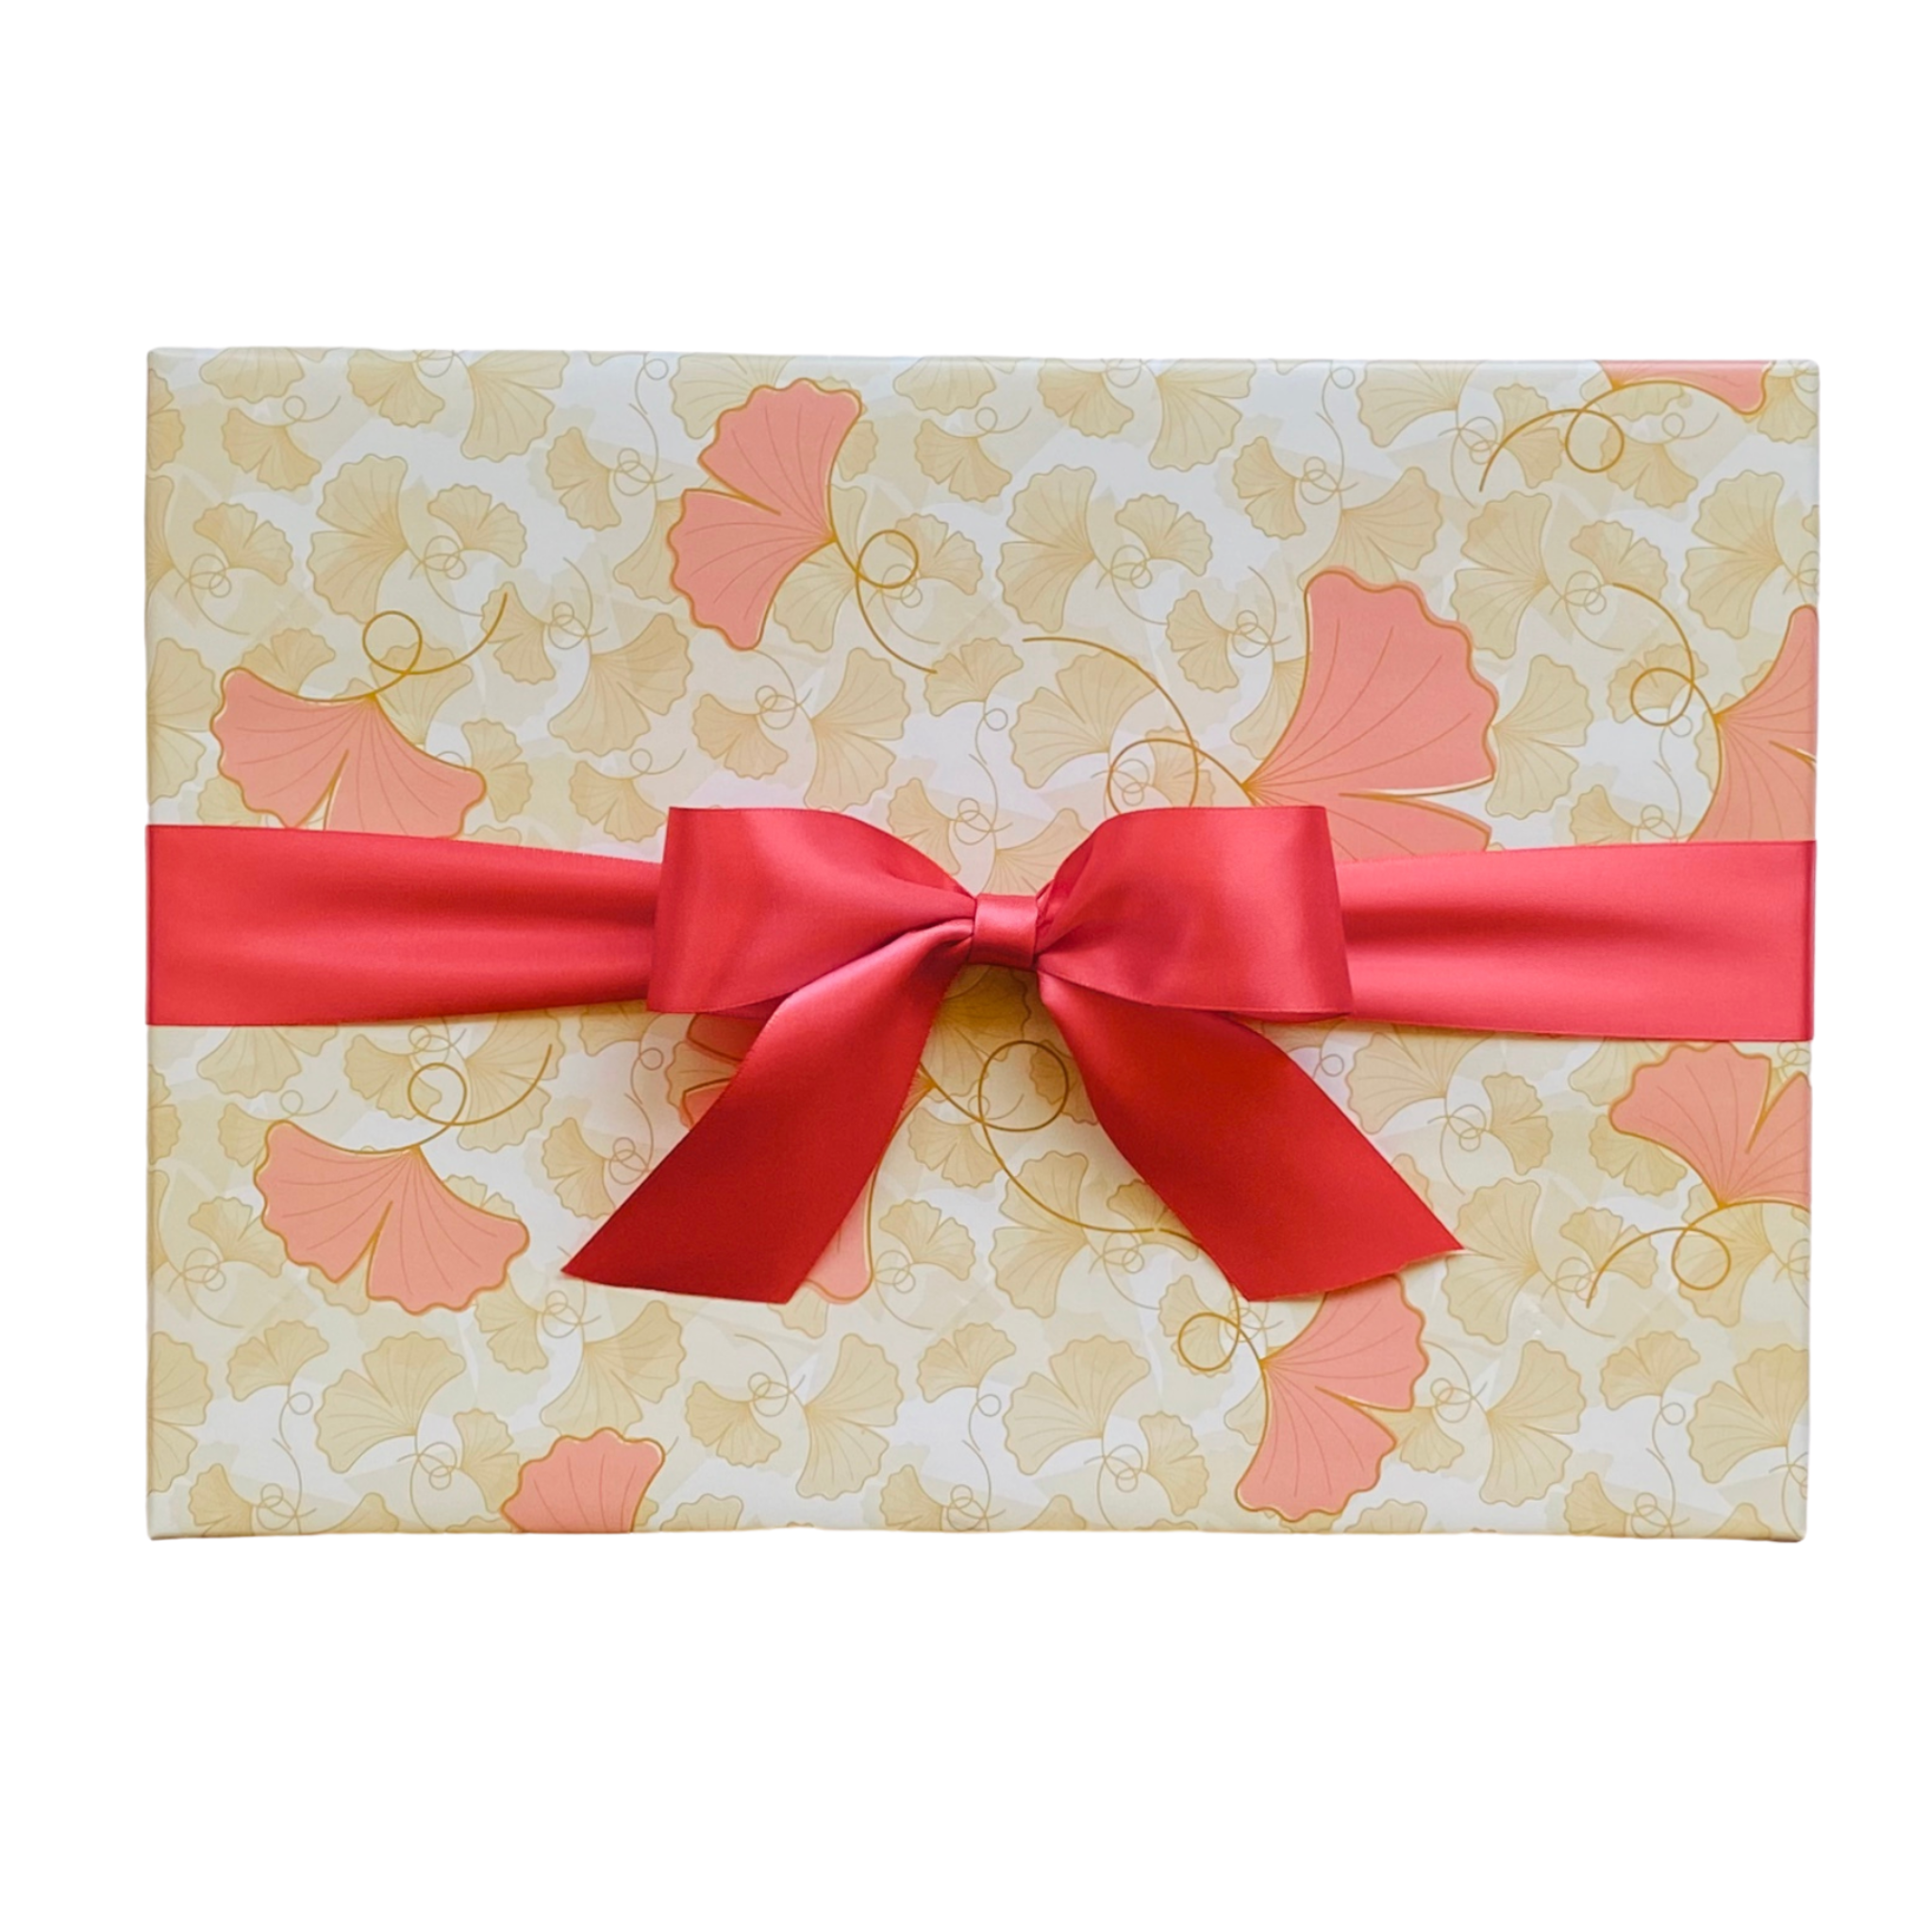 Luxury Gift Box Wrapped in Ginkgo Biloba Coral Gift Wrap